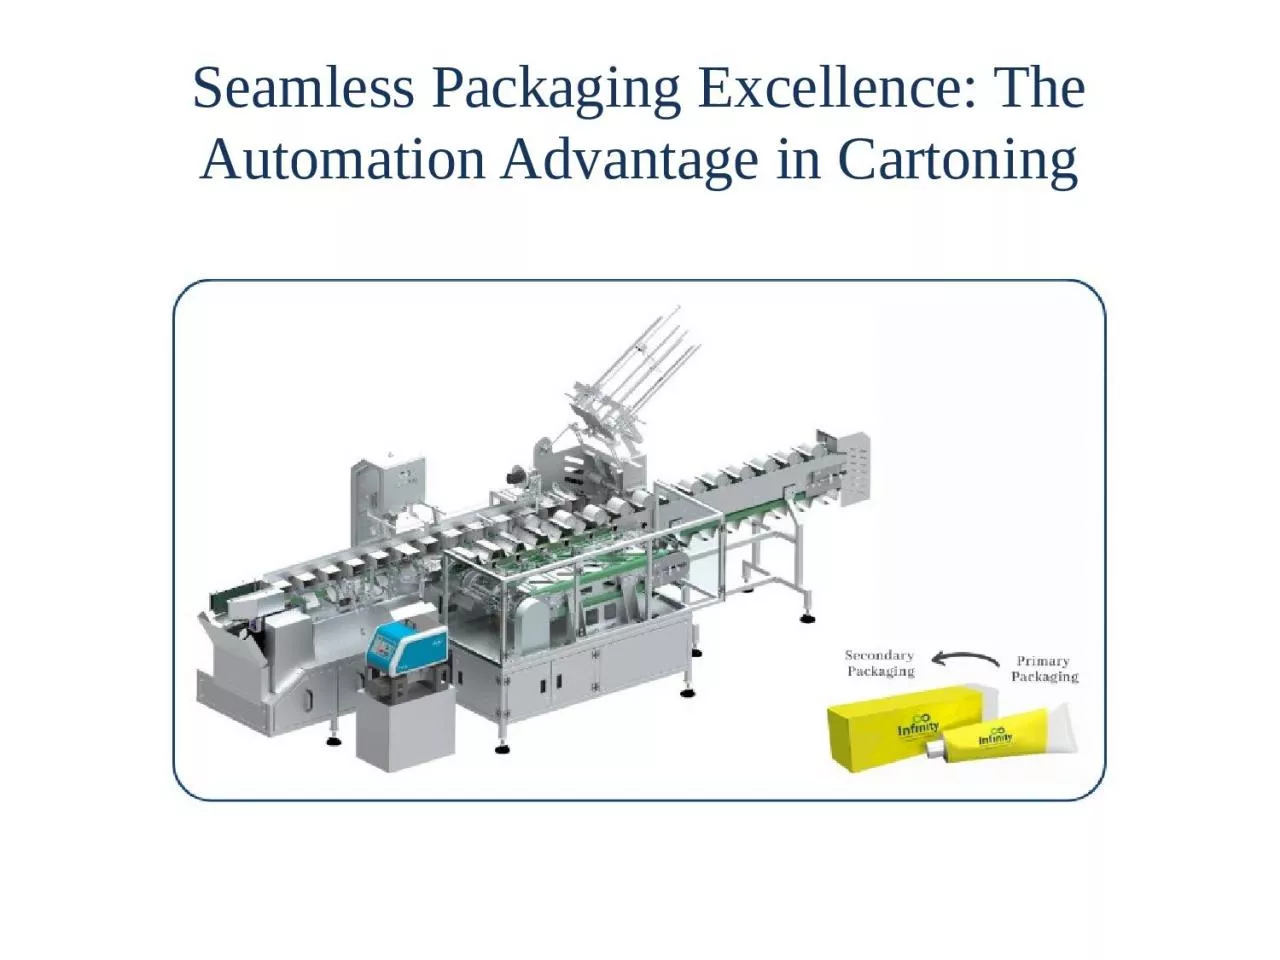 Seamless Packaging Excellence: The Automation Advantage in Cartoning